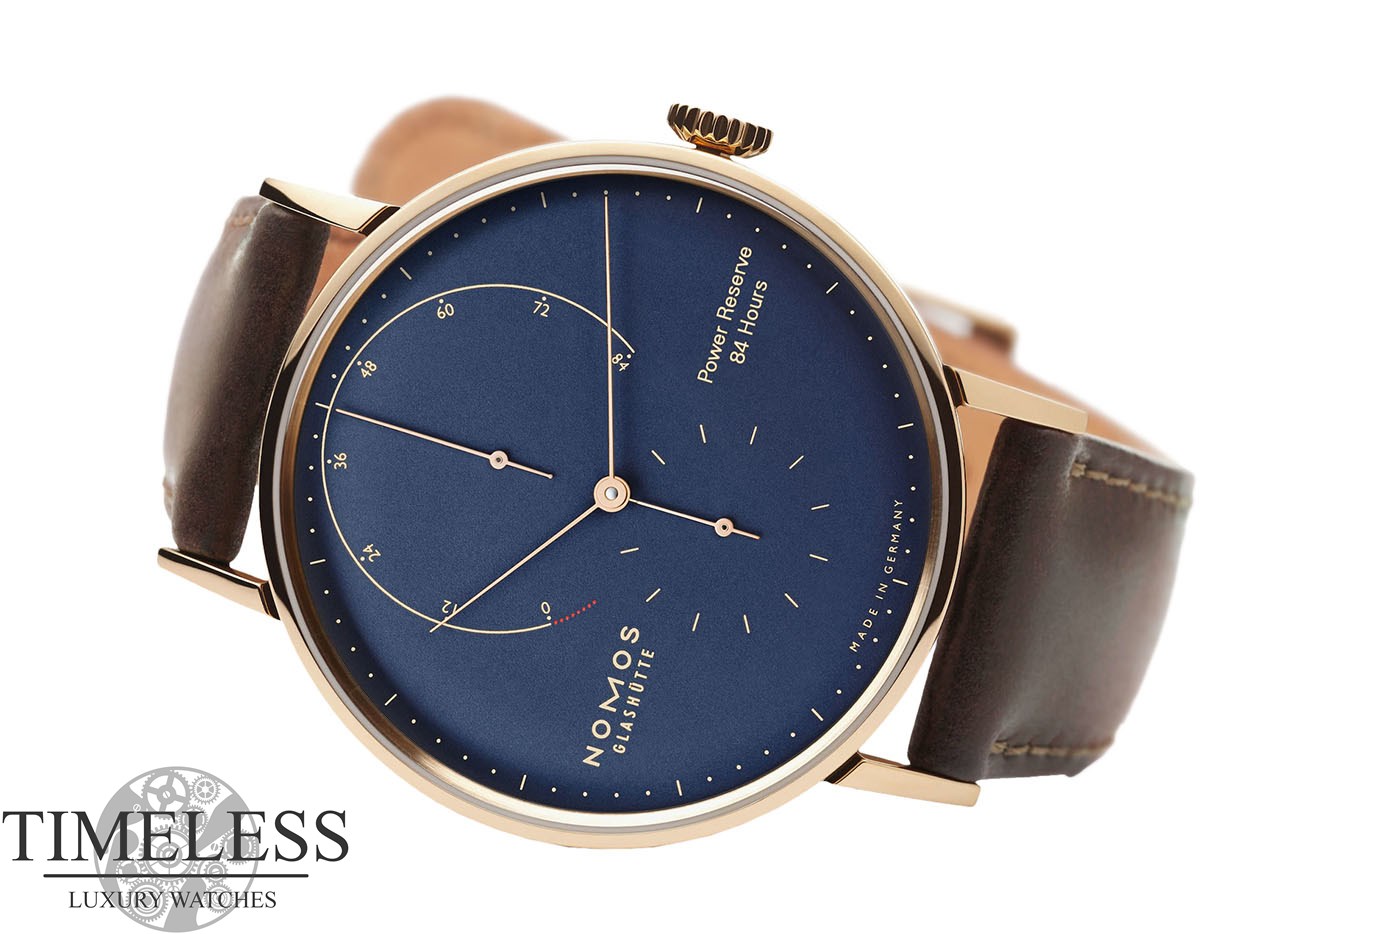 Nomos Lambda Limited Edition Watch For Timeless Luxury Watches